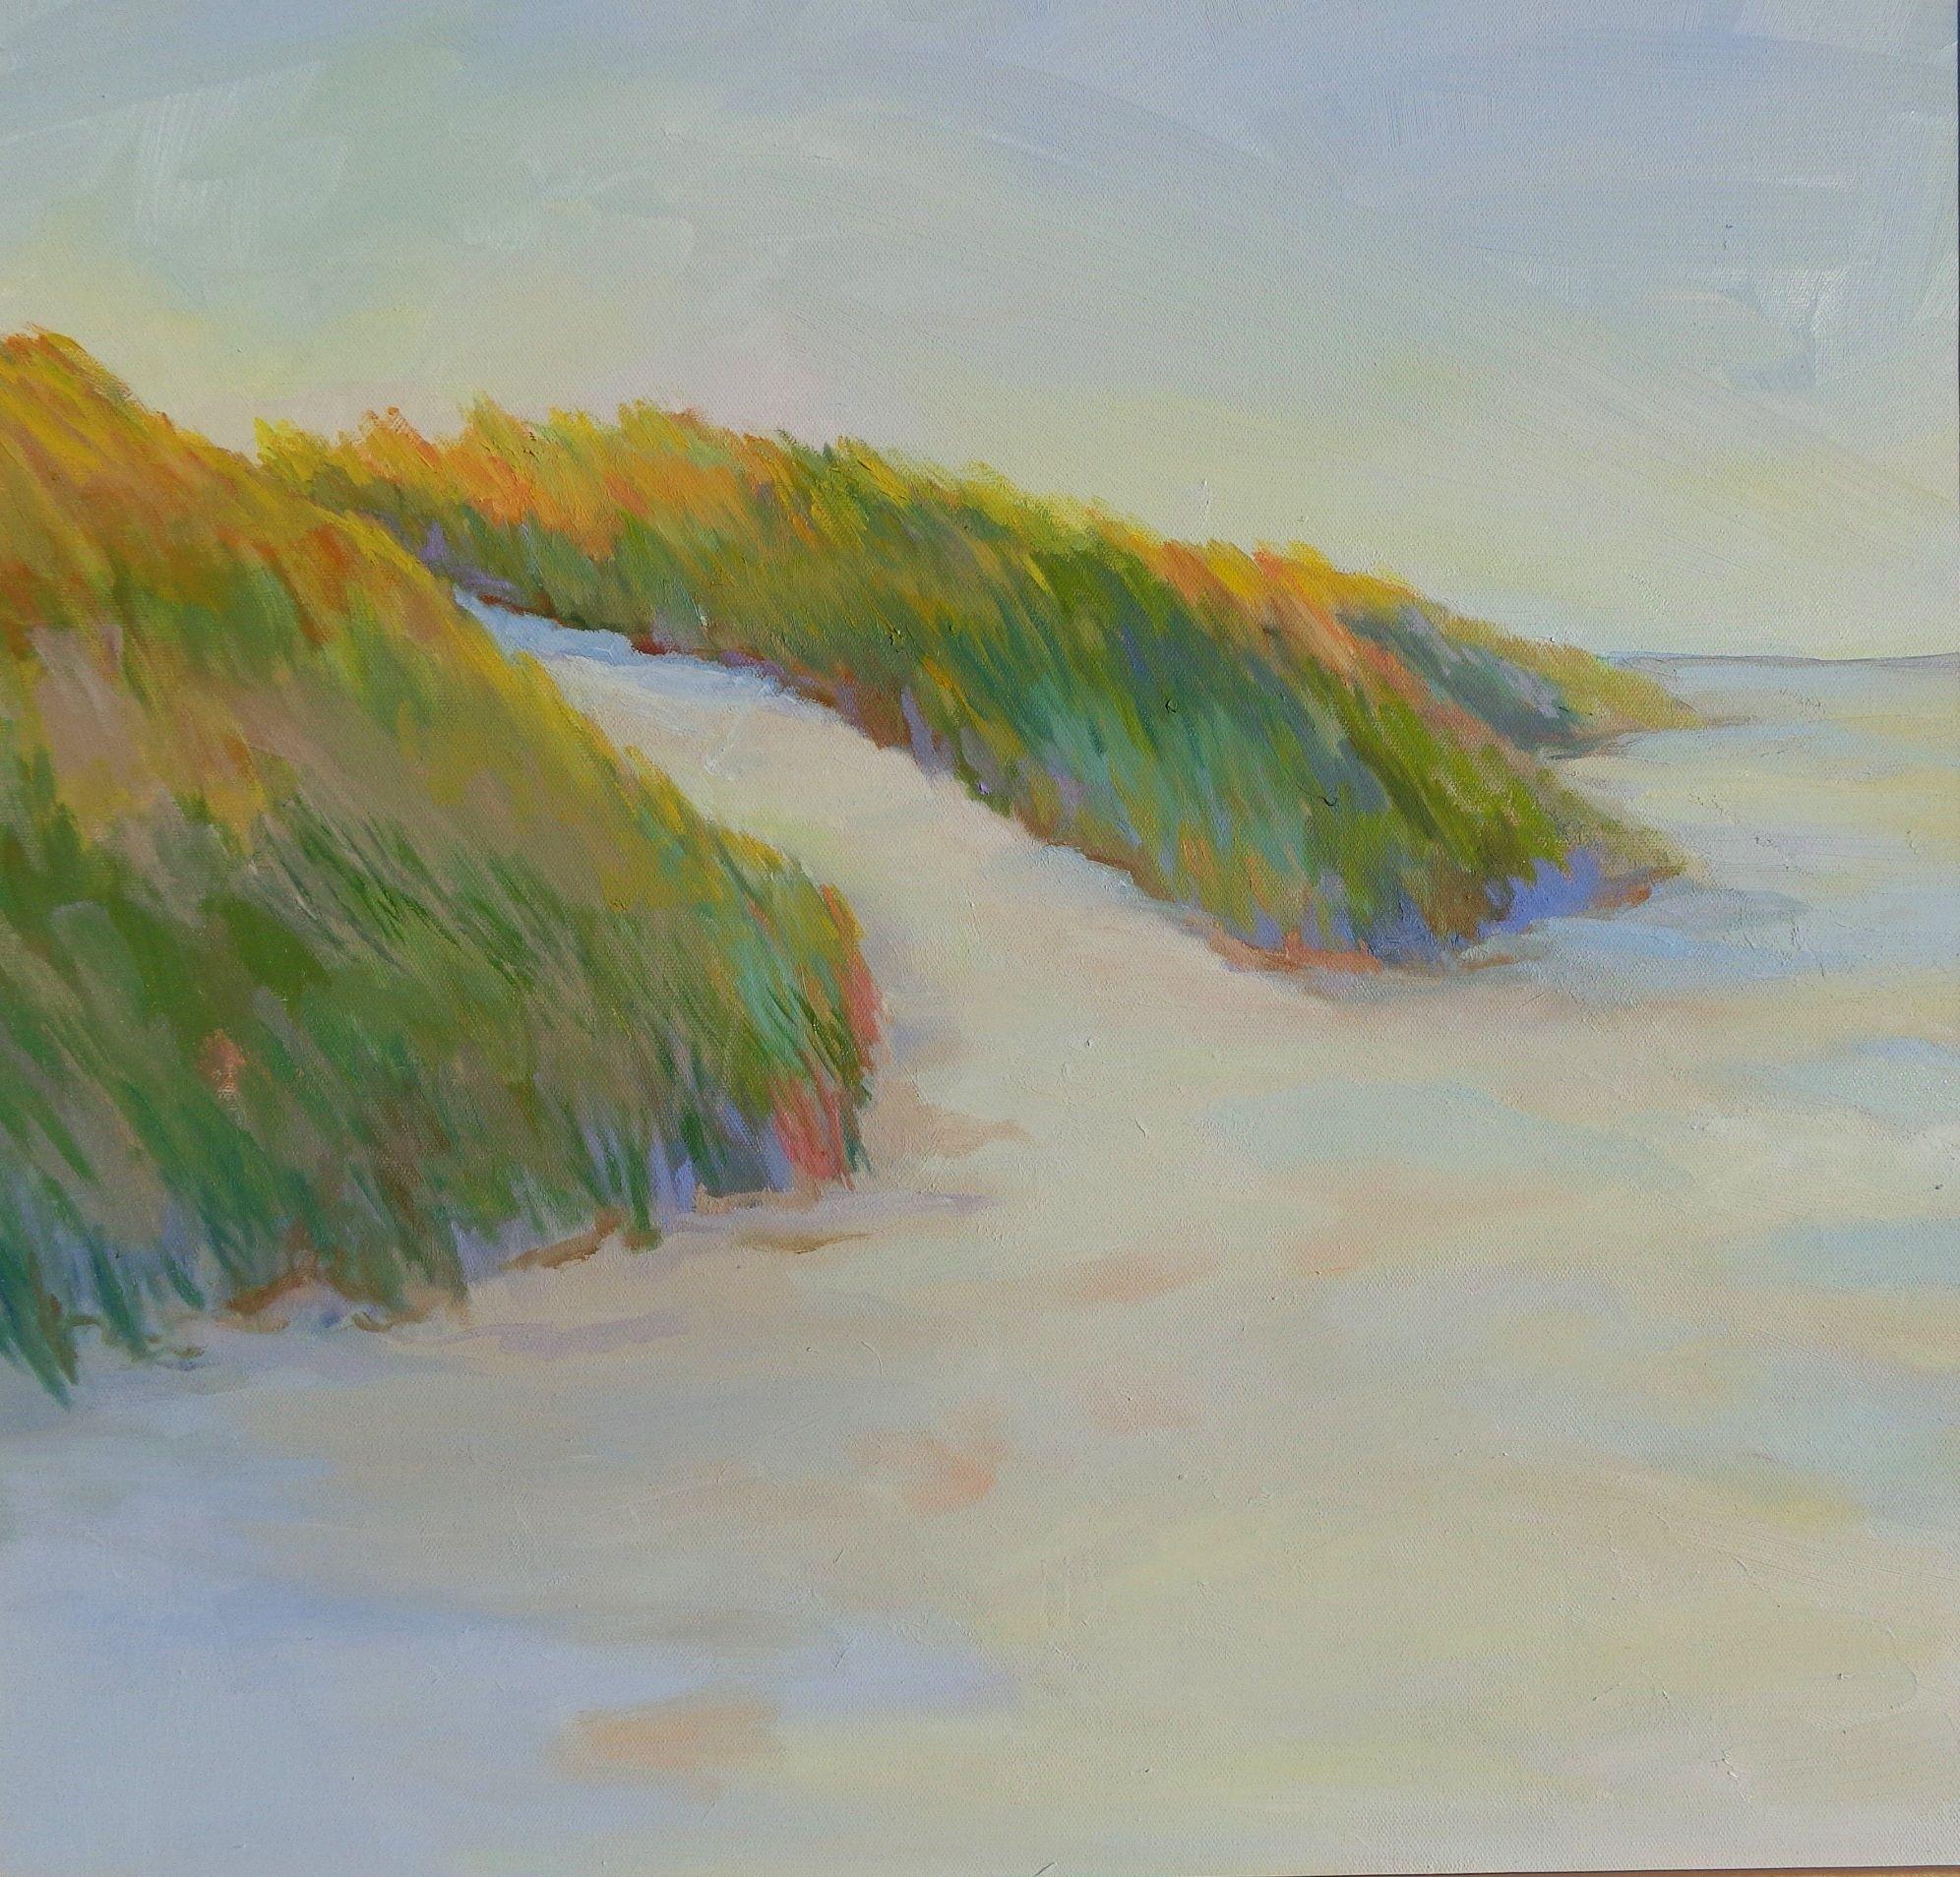 "Dunes" is the quintessential summer image . The image is actually of the sand dunes along Ogunquit Beach in Maine. The three miles of grassy dunes create a natural barrier between the Atlantic Ocean and the Ogunquit River.     I've been walking